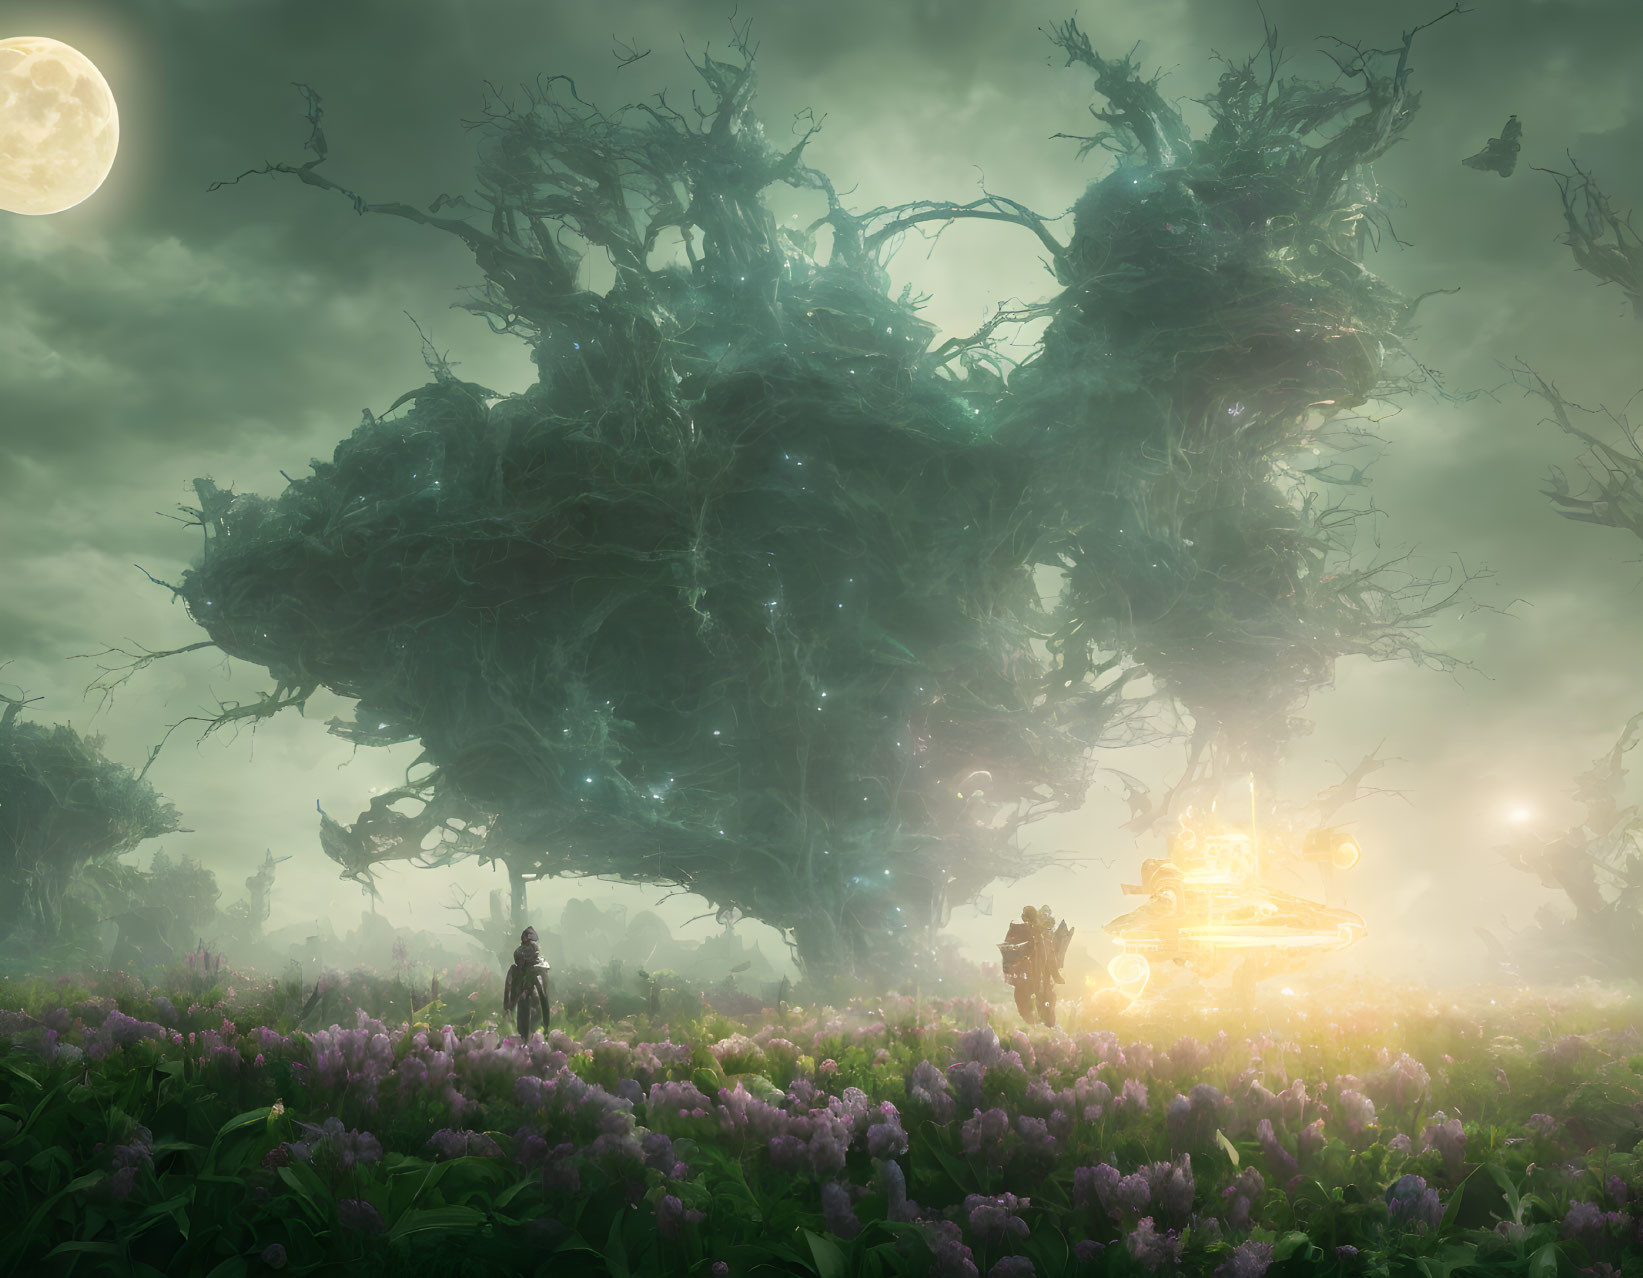 Surreal floating island with twisted trees above flower field